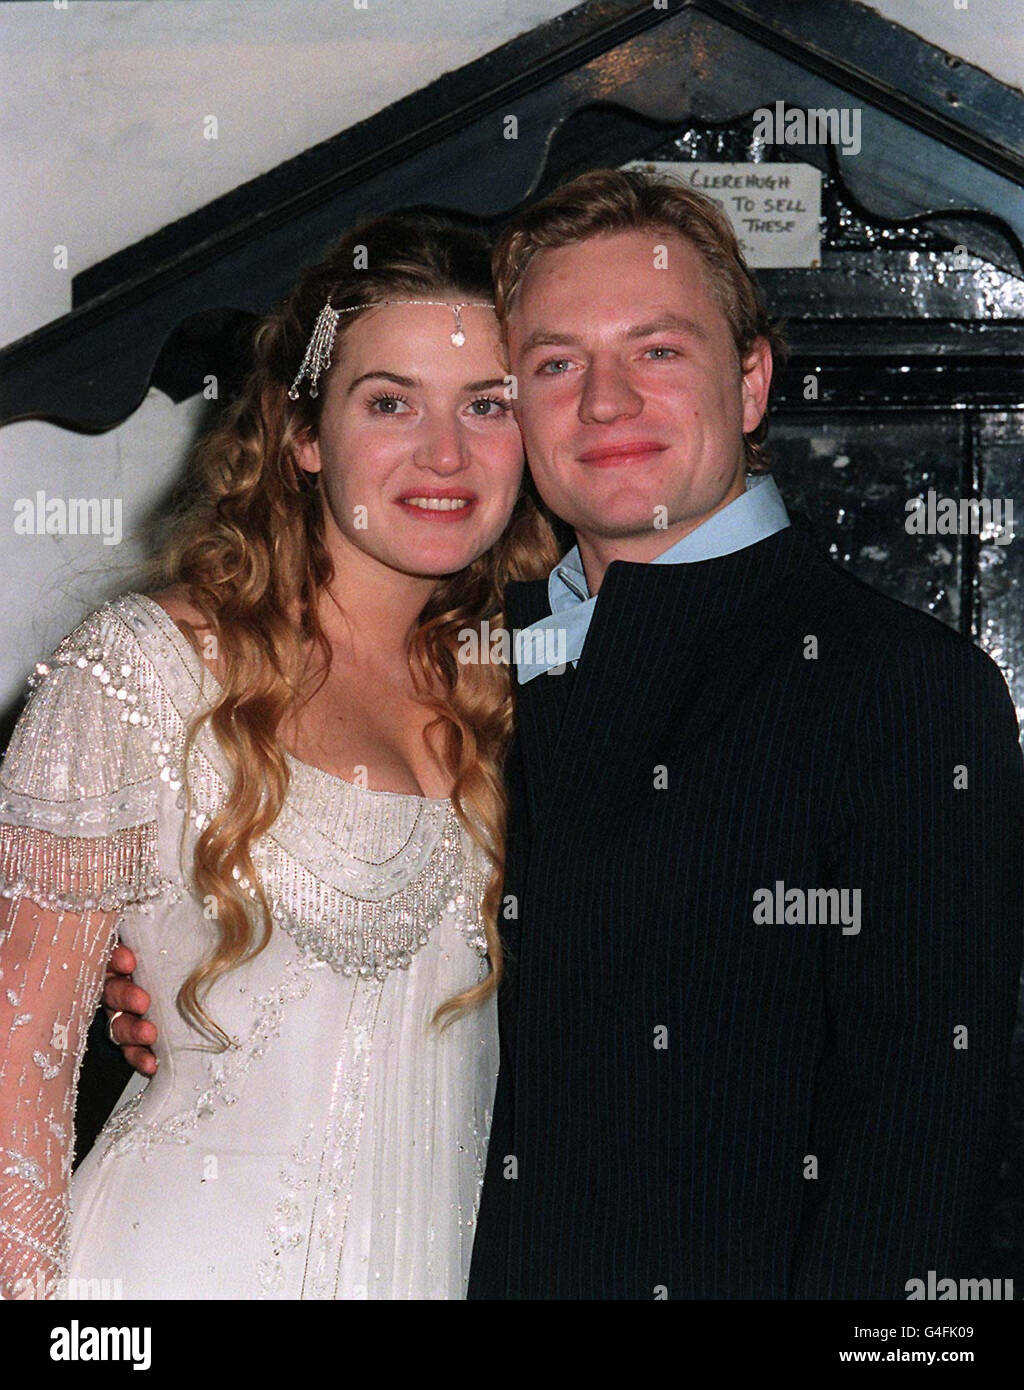 Actress Kate Winslet and new husband Jim Threapleton at their wedding reception in the Crooked Billet pub in Stoke Row, Oxfordshire. Stock Photo